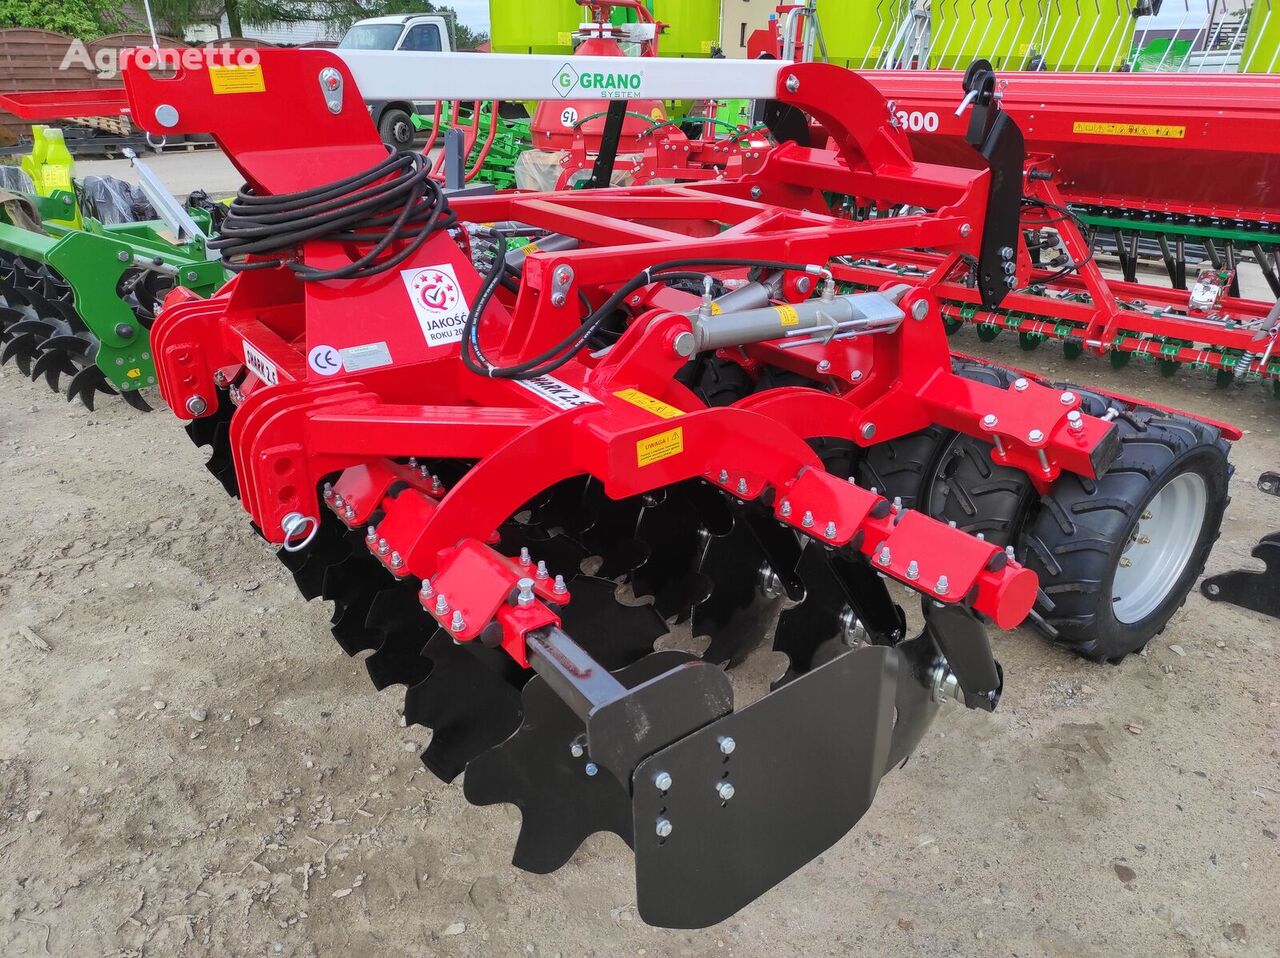 new Grano-System Brona uprawowo-siewna SHOP 2,5m / CULTIVATION AND SOWING HARROW disk harrow